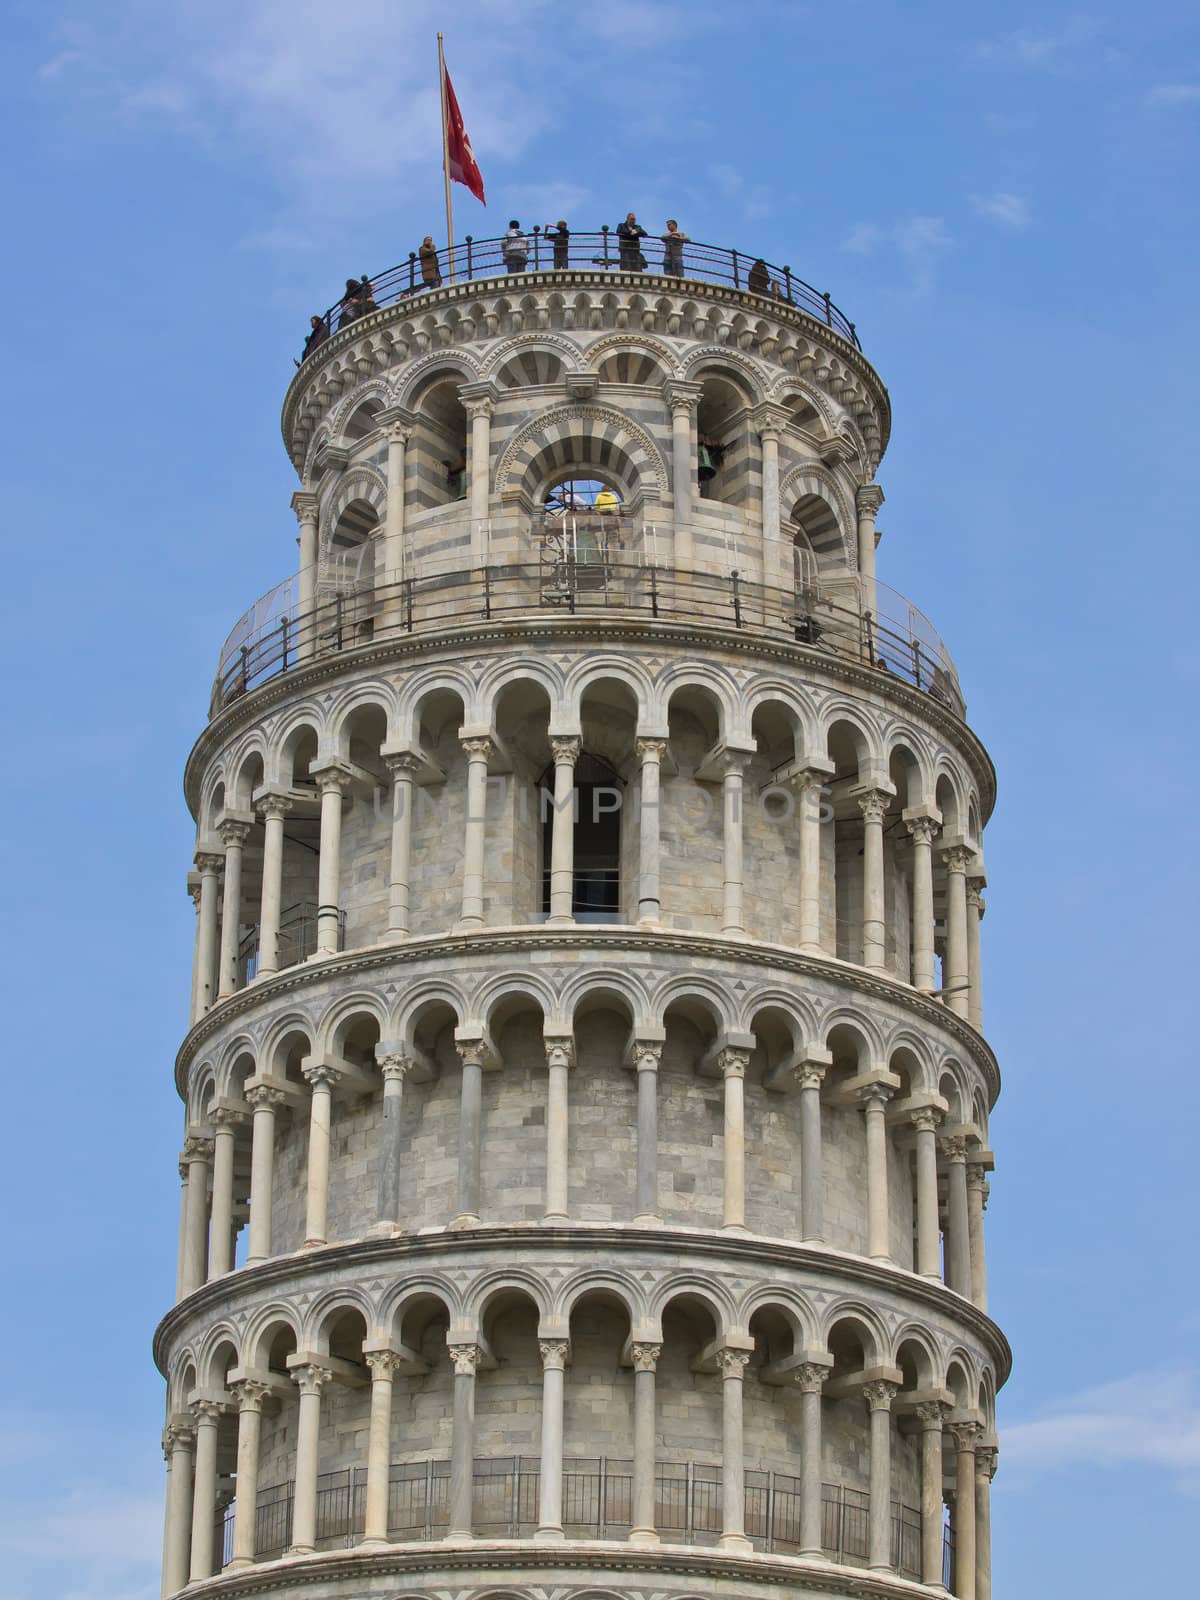 famouse tower in pisa italy